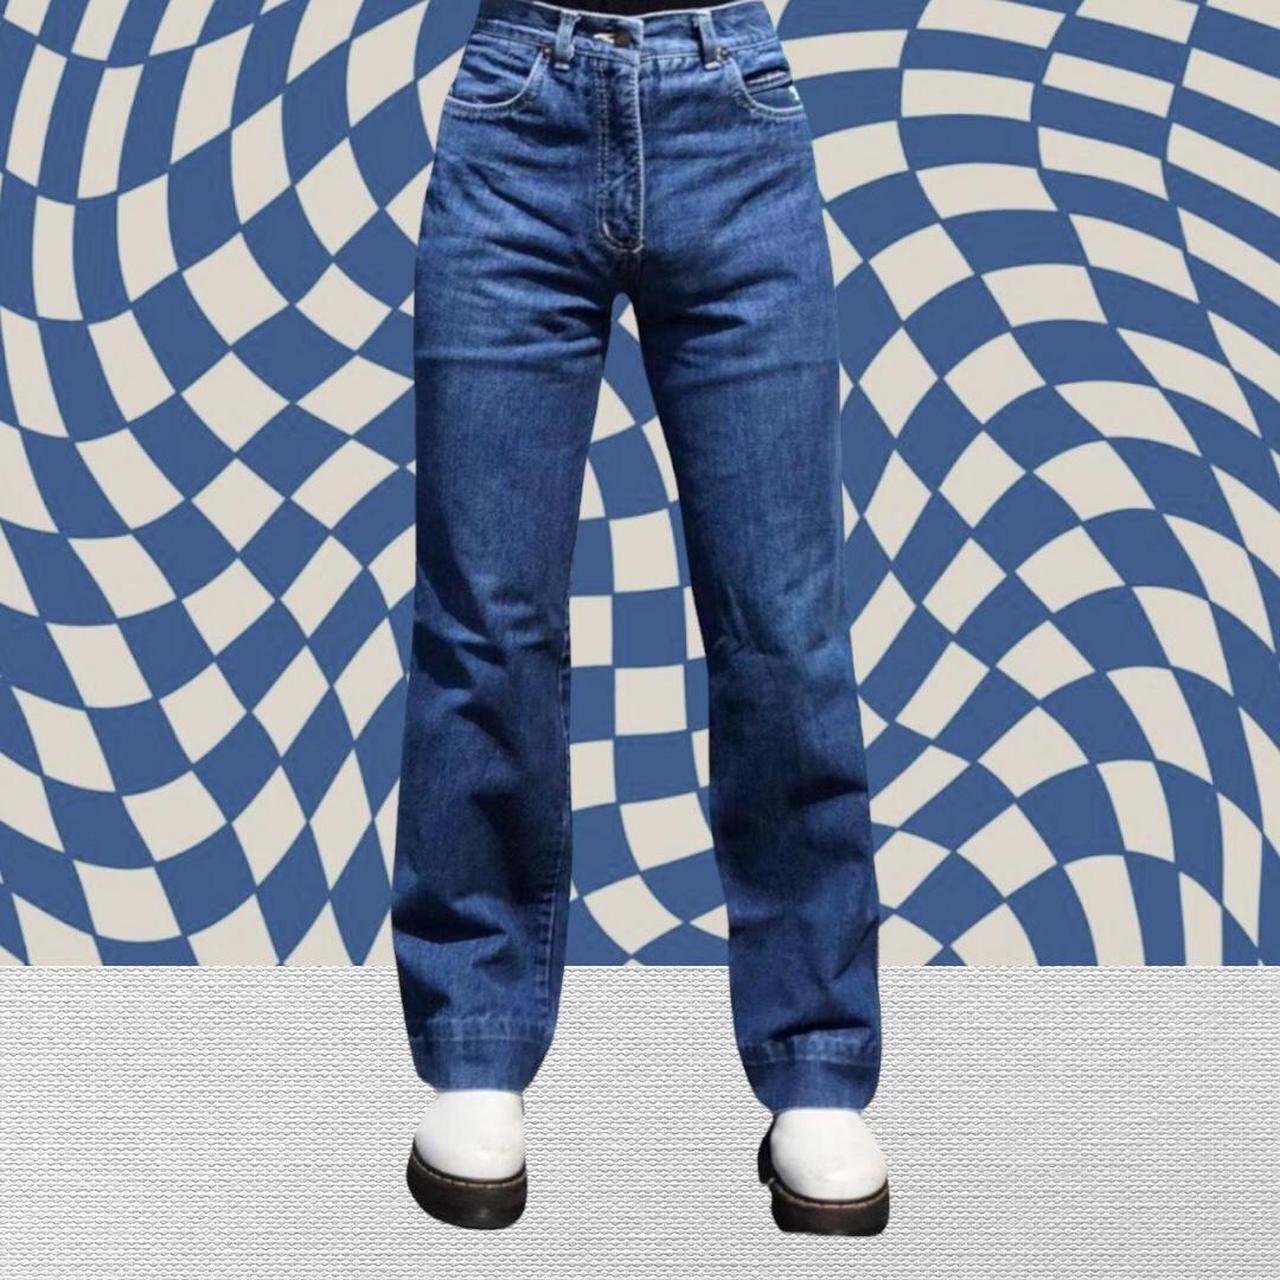 Paco Rabanne Men's Blue and Navy Jeans